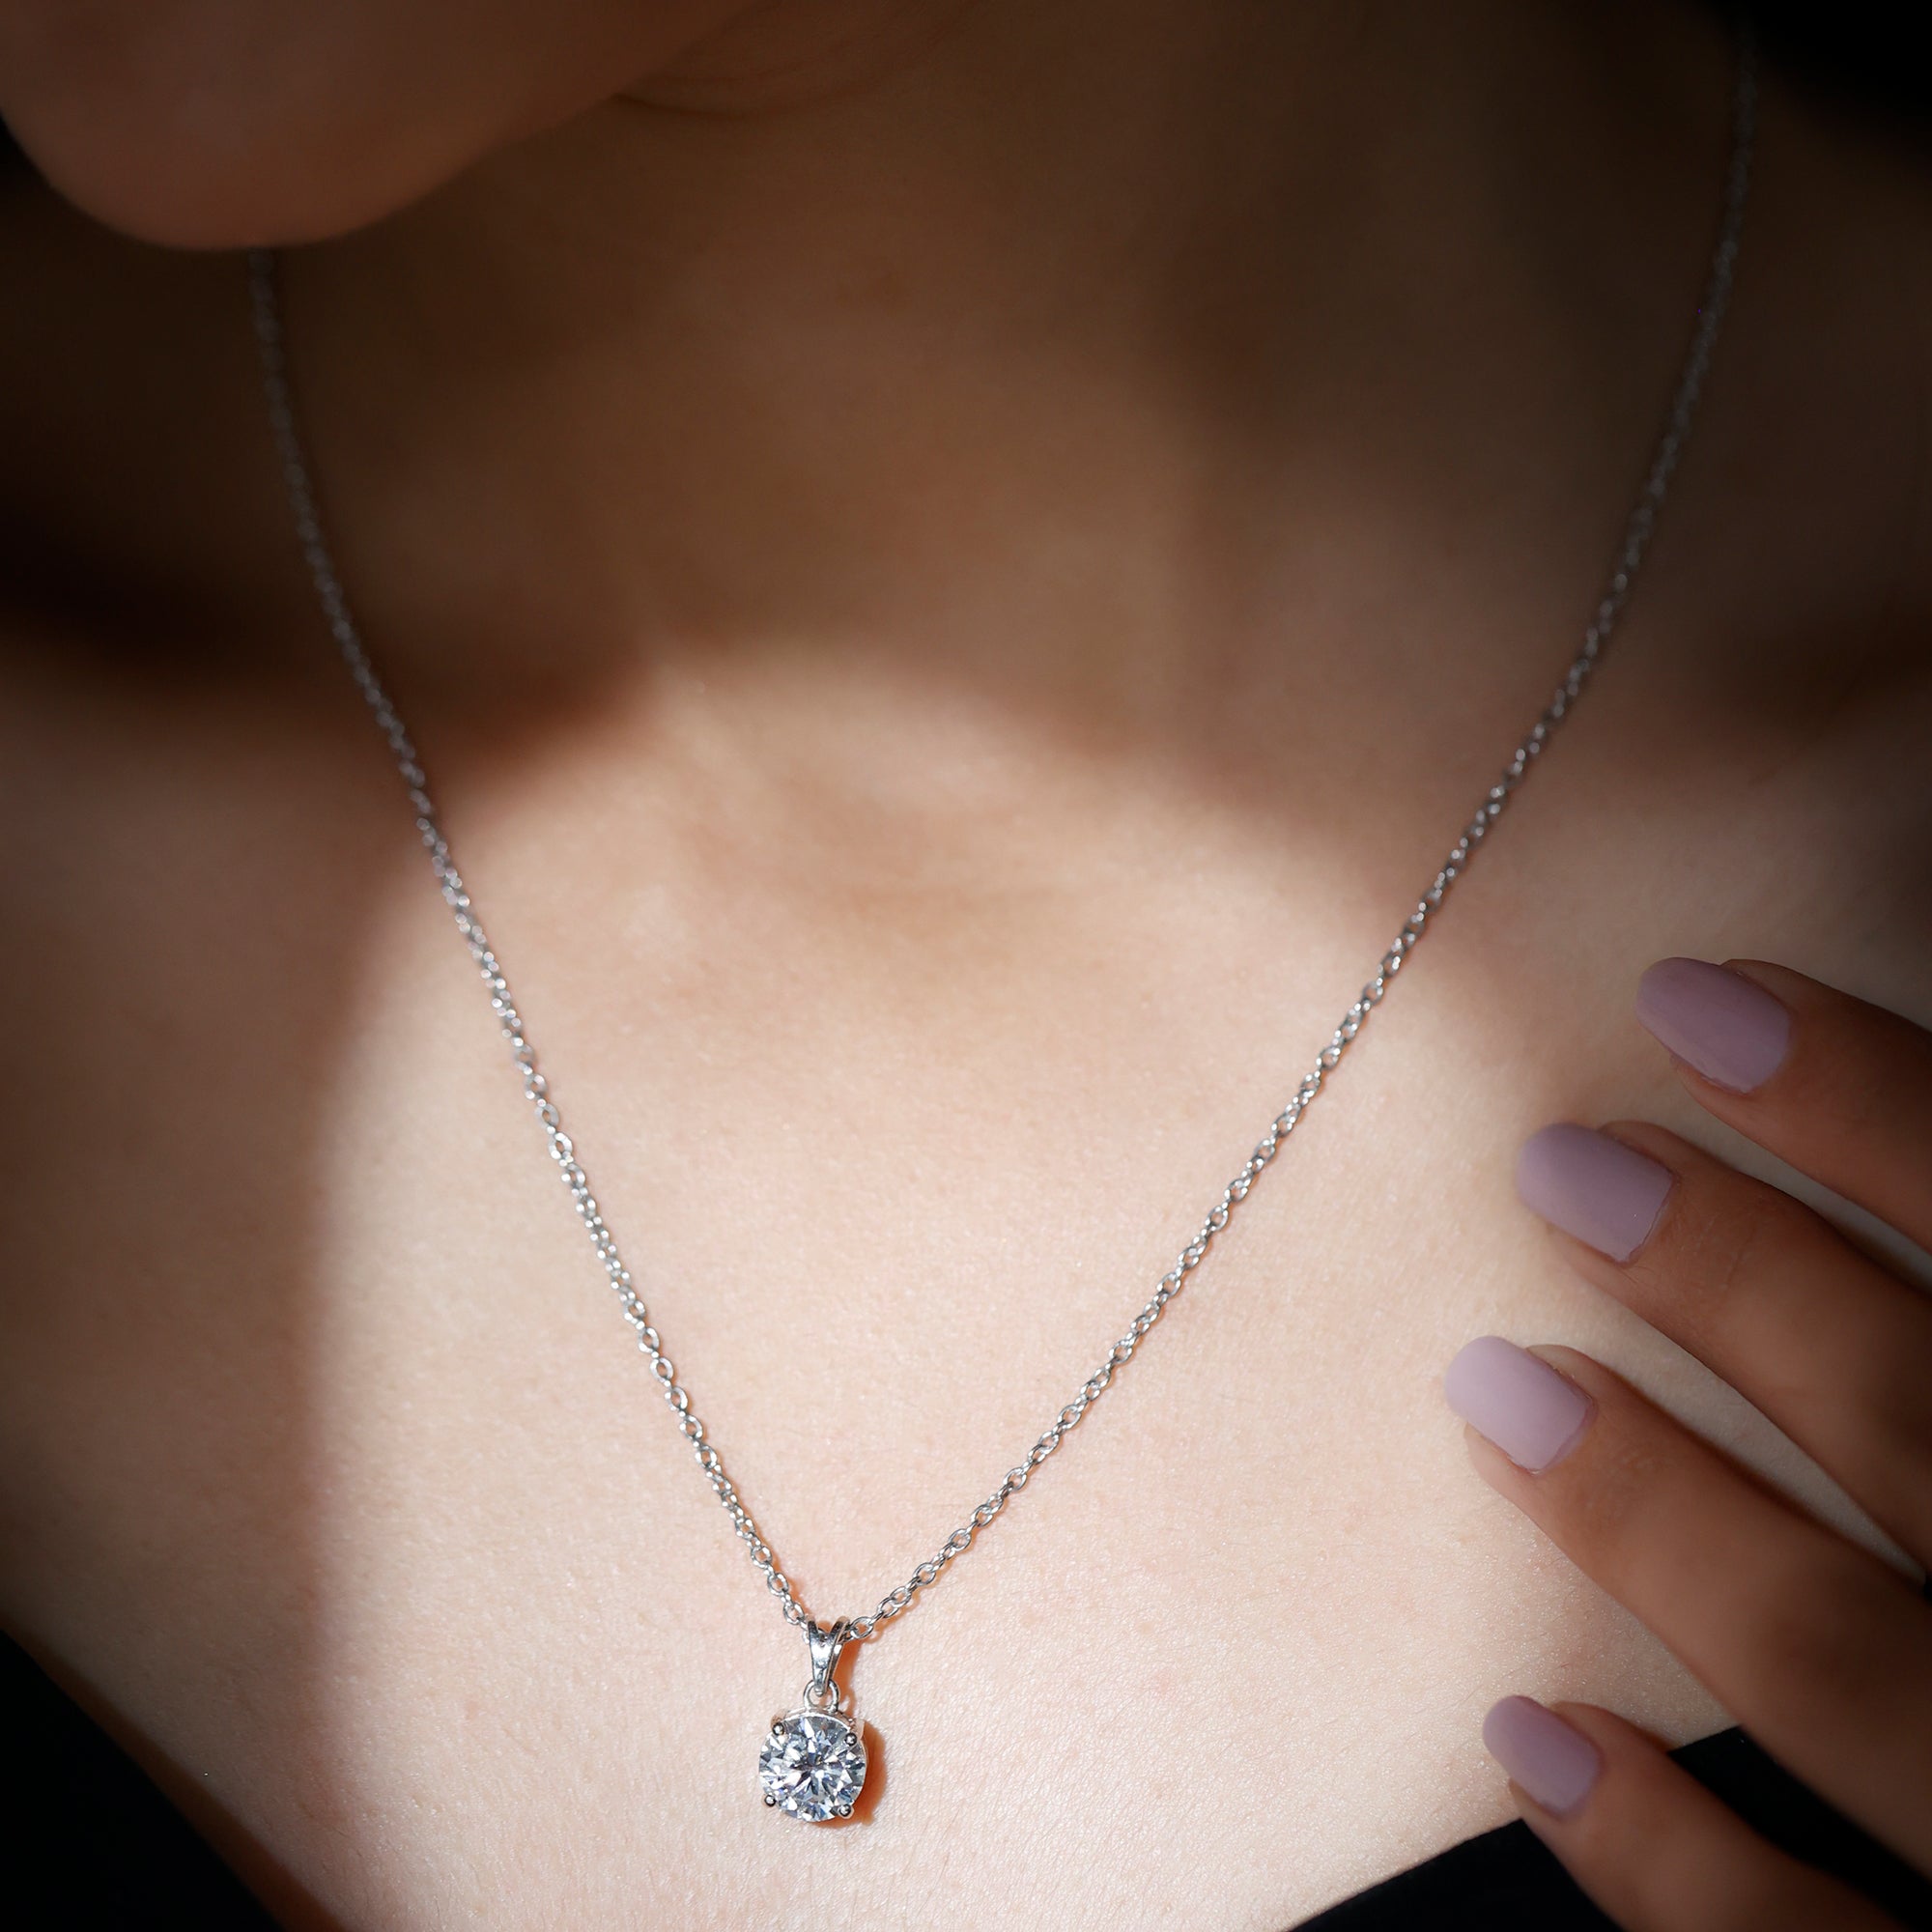 8 MM Certified Moissanite Solitaire Pendant Necklace - Rosec Jewels